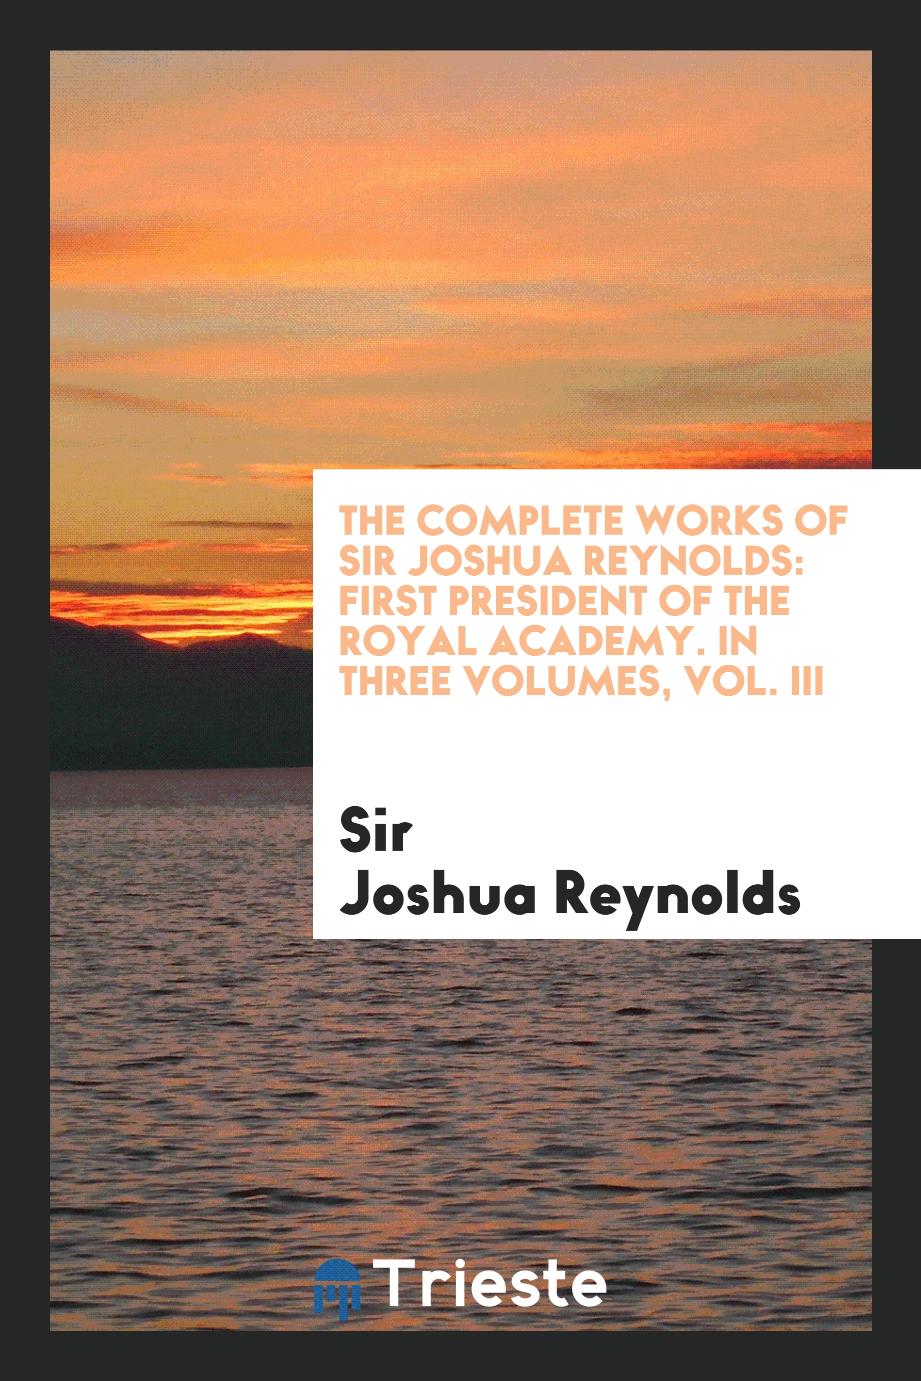 The Complete Works of Sir Joshua Reynolds: First President of the Royal Academy. In Three Volumes, Vol. III